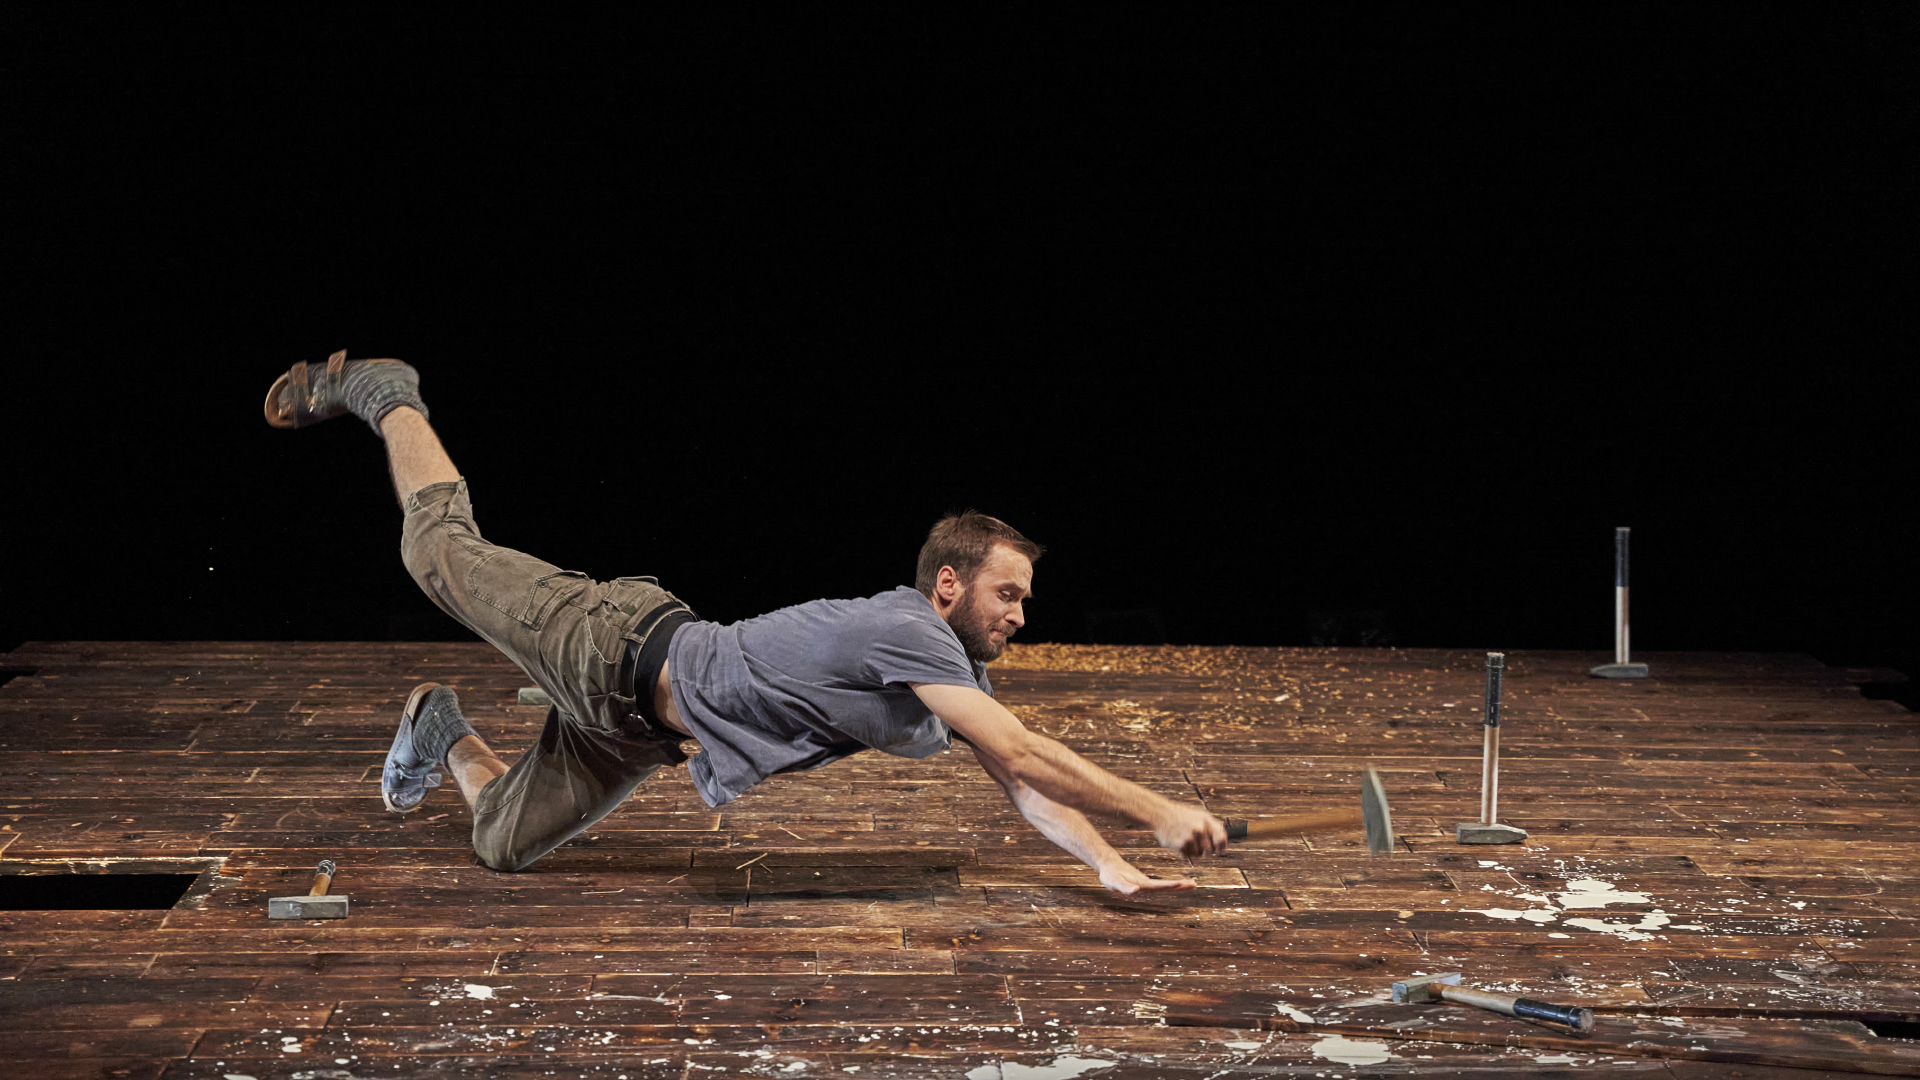 A person is jumping across a stage with a woodworking tool in his hand.